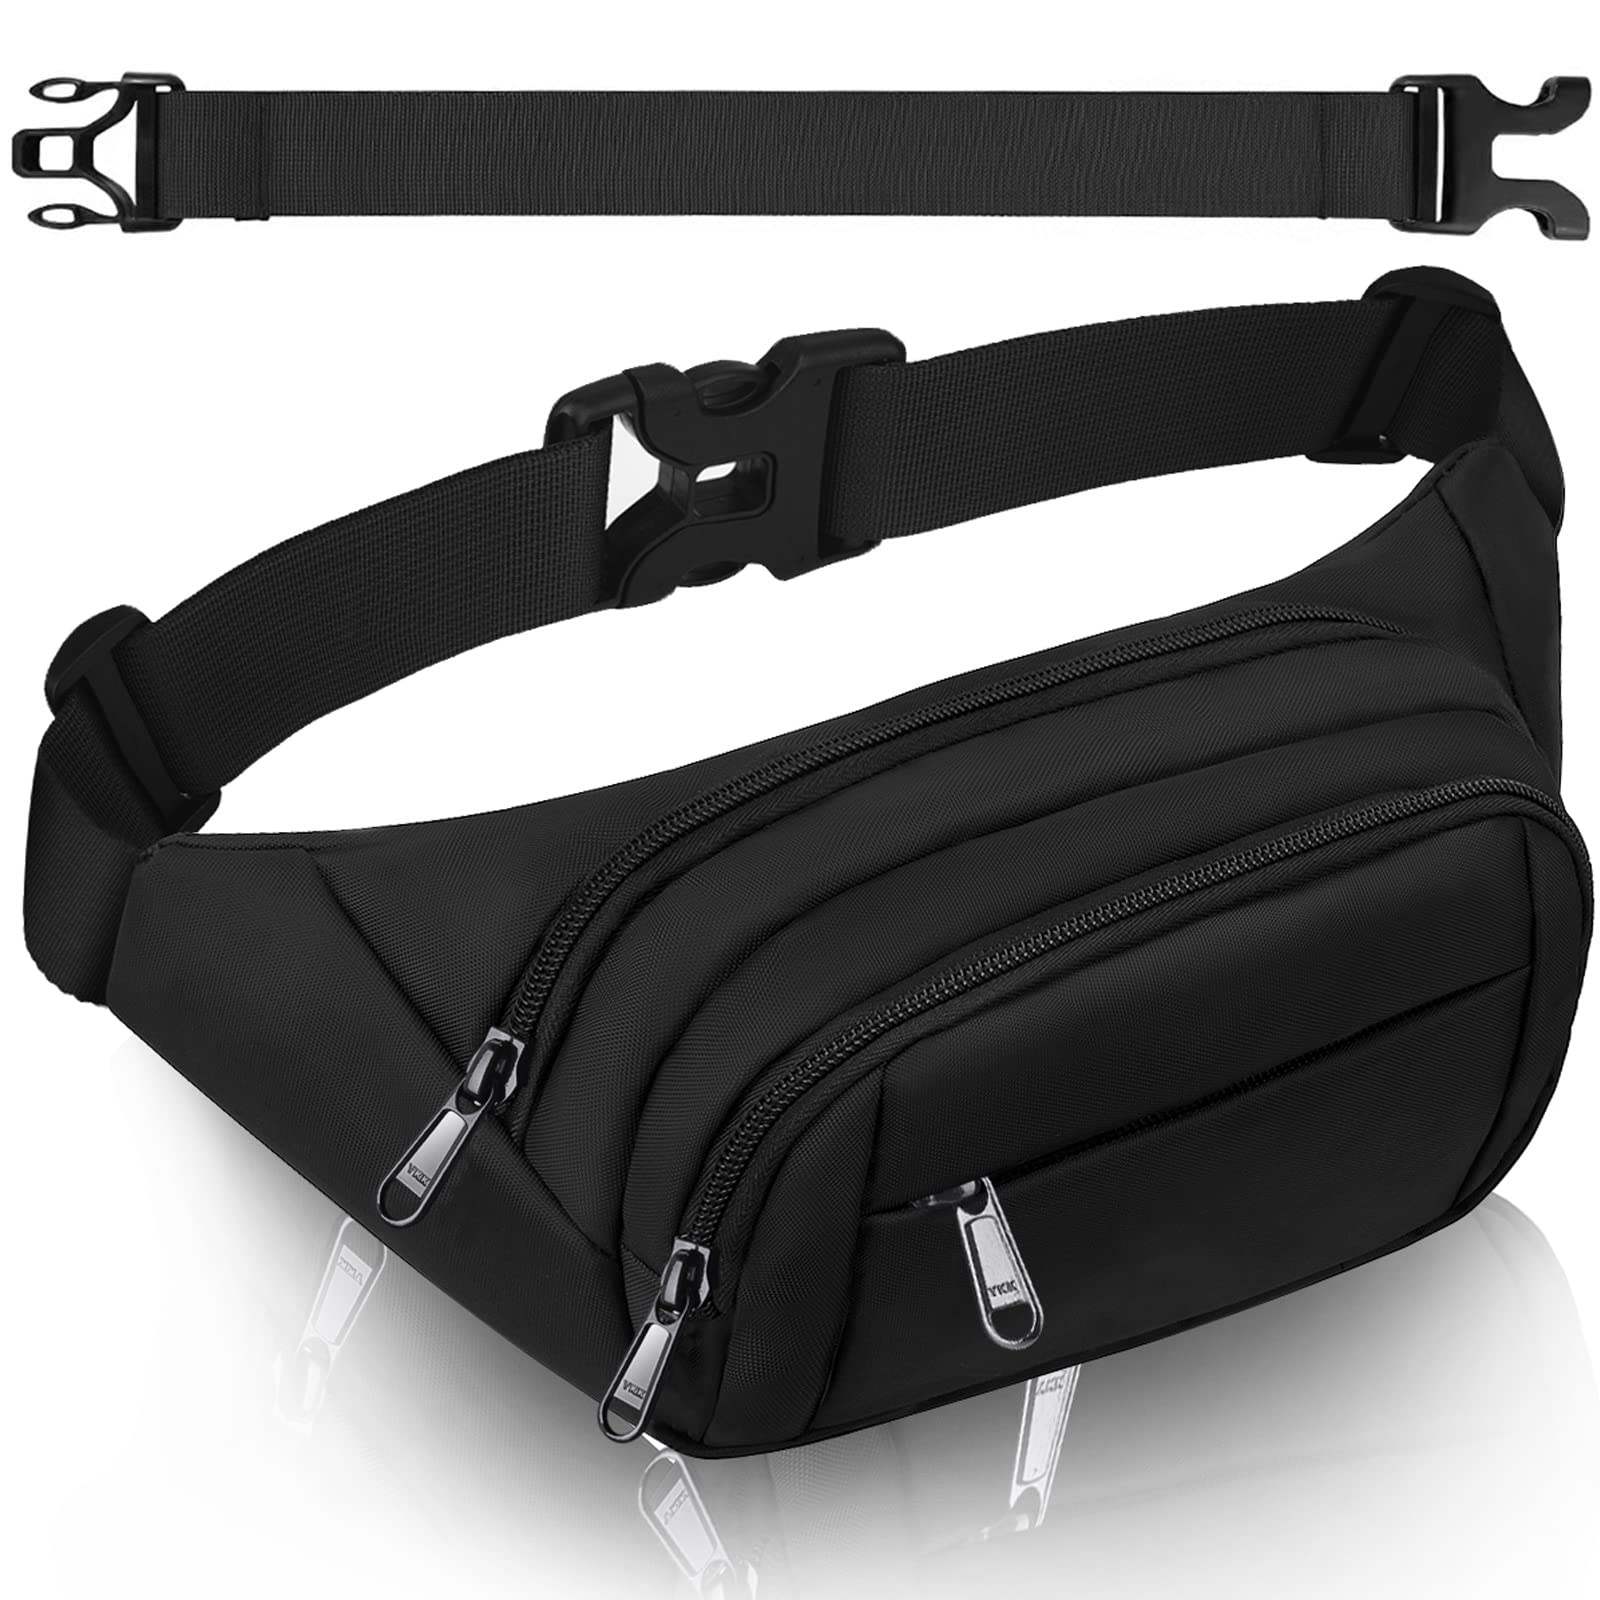 Fanny Pack for Men & Women, Fashion Waterproof Waist Packs with Adjustable  Belt, Casual Bag Bum Bags for Travel Sports Running. 2-Black